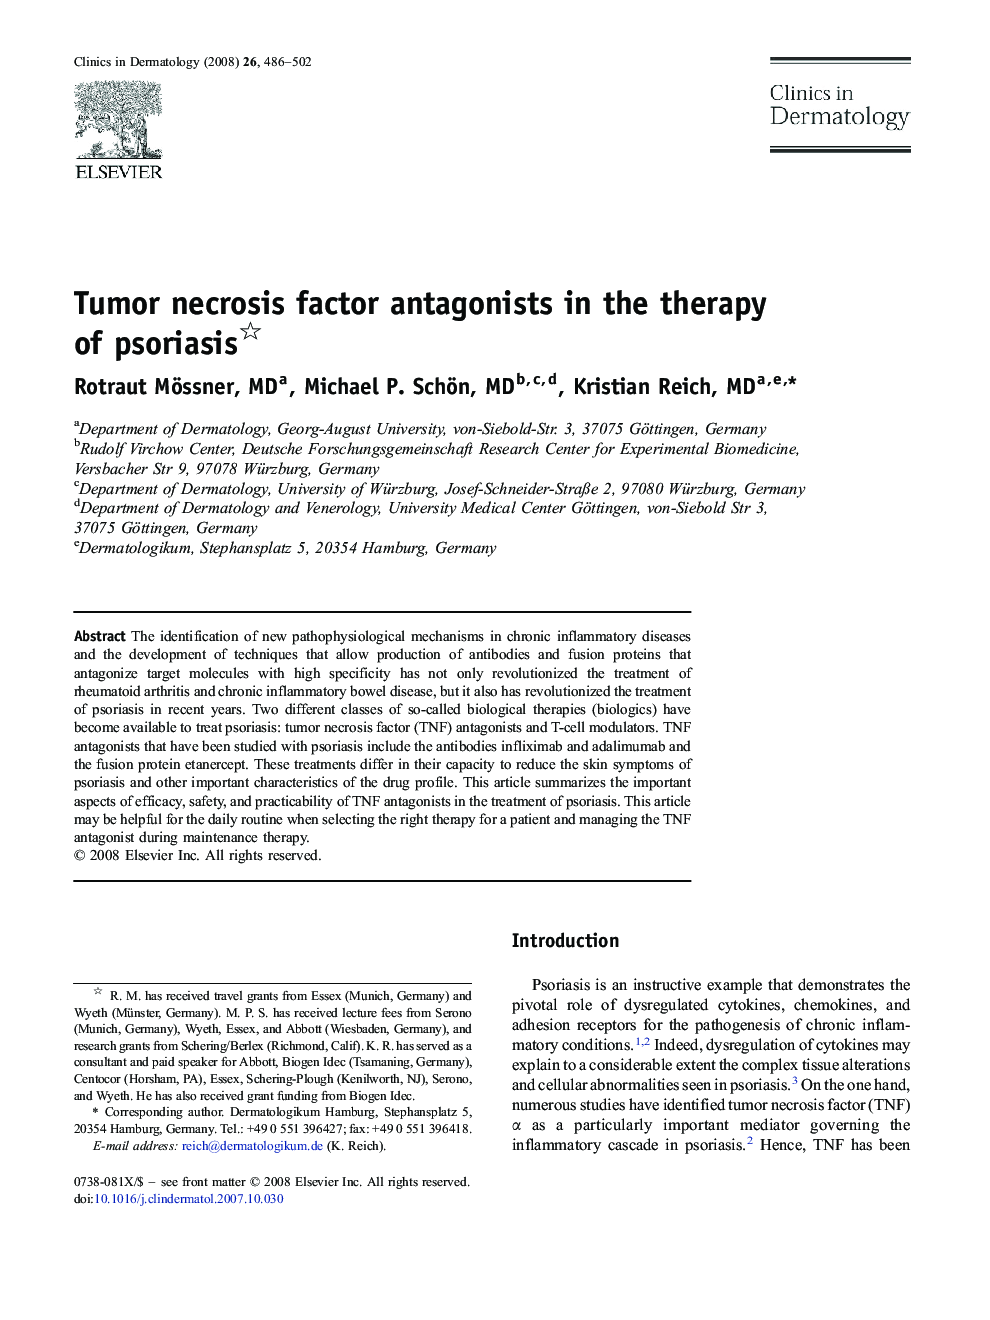 Tumor necrosis factor antagonists in the therapy of psoriasis 